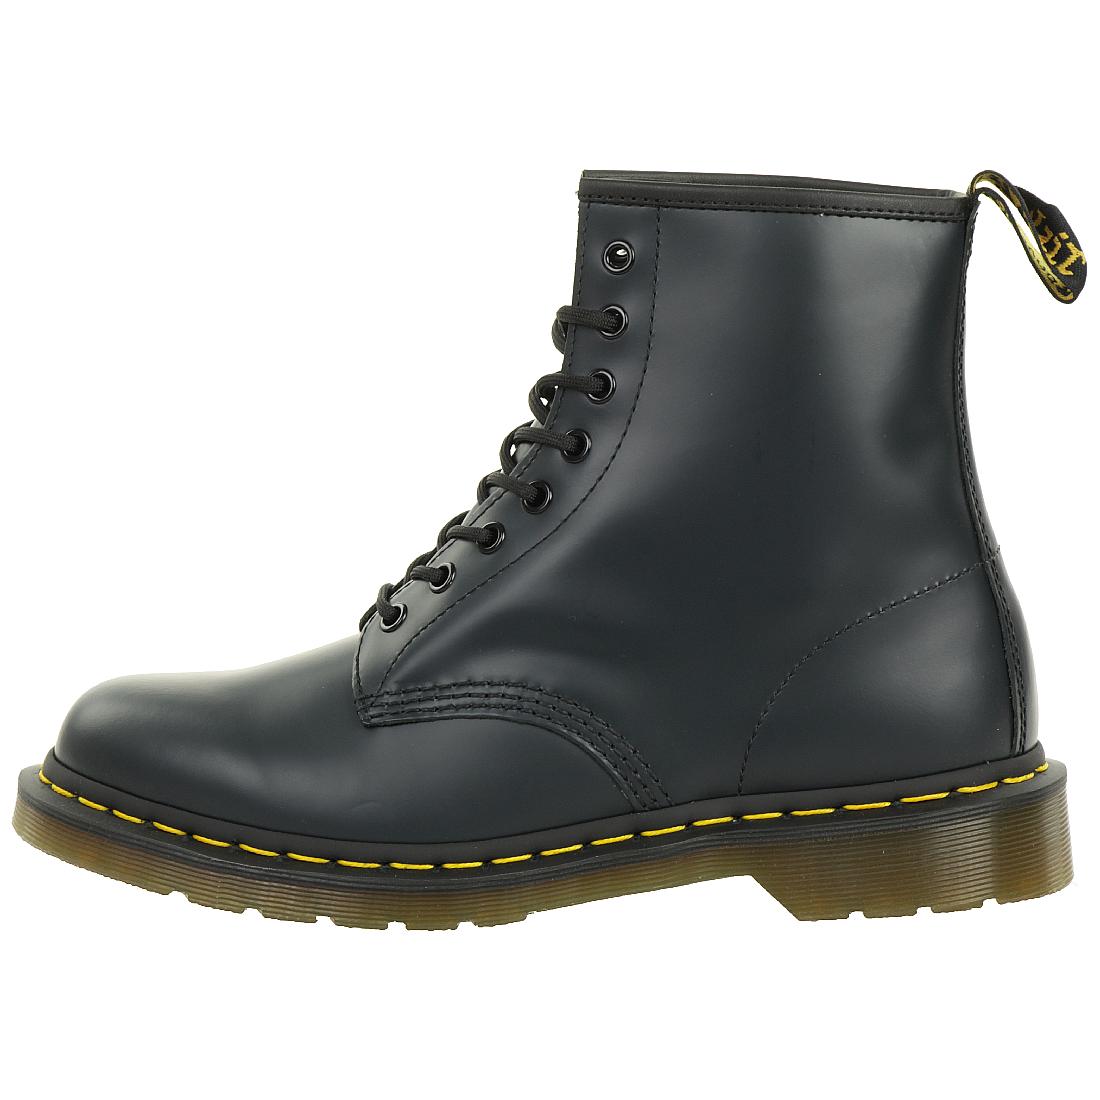 Dr. Martens 1460 Smooth Unisex Stiefel Boots Navy 10072410